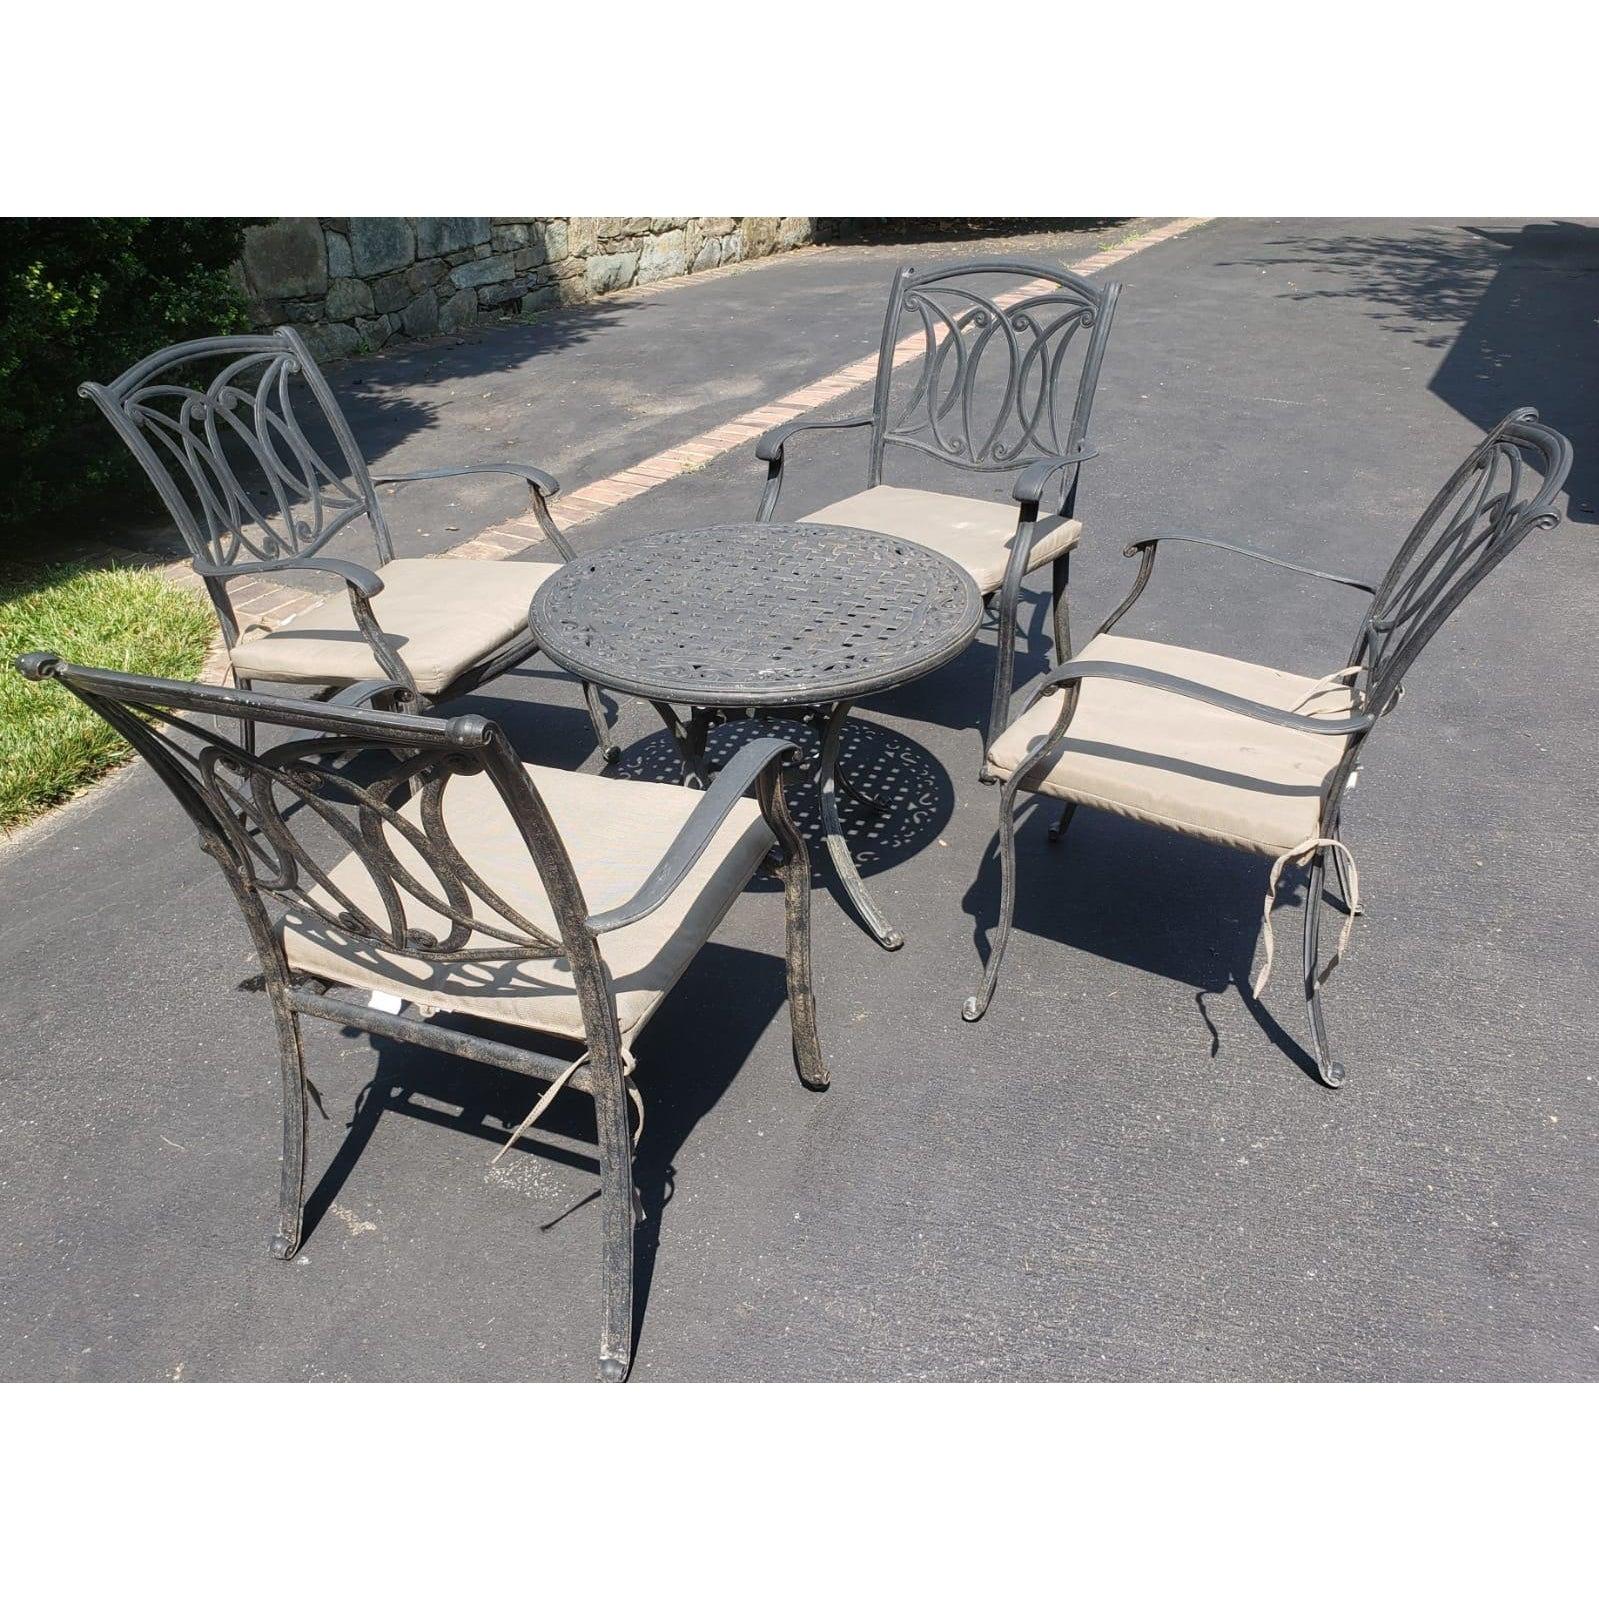 Vintage cast aluminum UV and rust resistent stackable patio armchairs with cushions and table set with cushions. Frame very durable, Water resistent; UV resistant; Resistant and rust resistant. 
Good vintage condition. Generous size 24W x 24D x